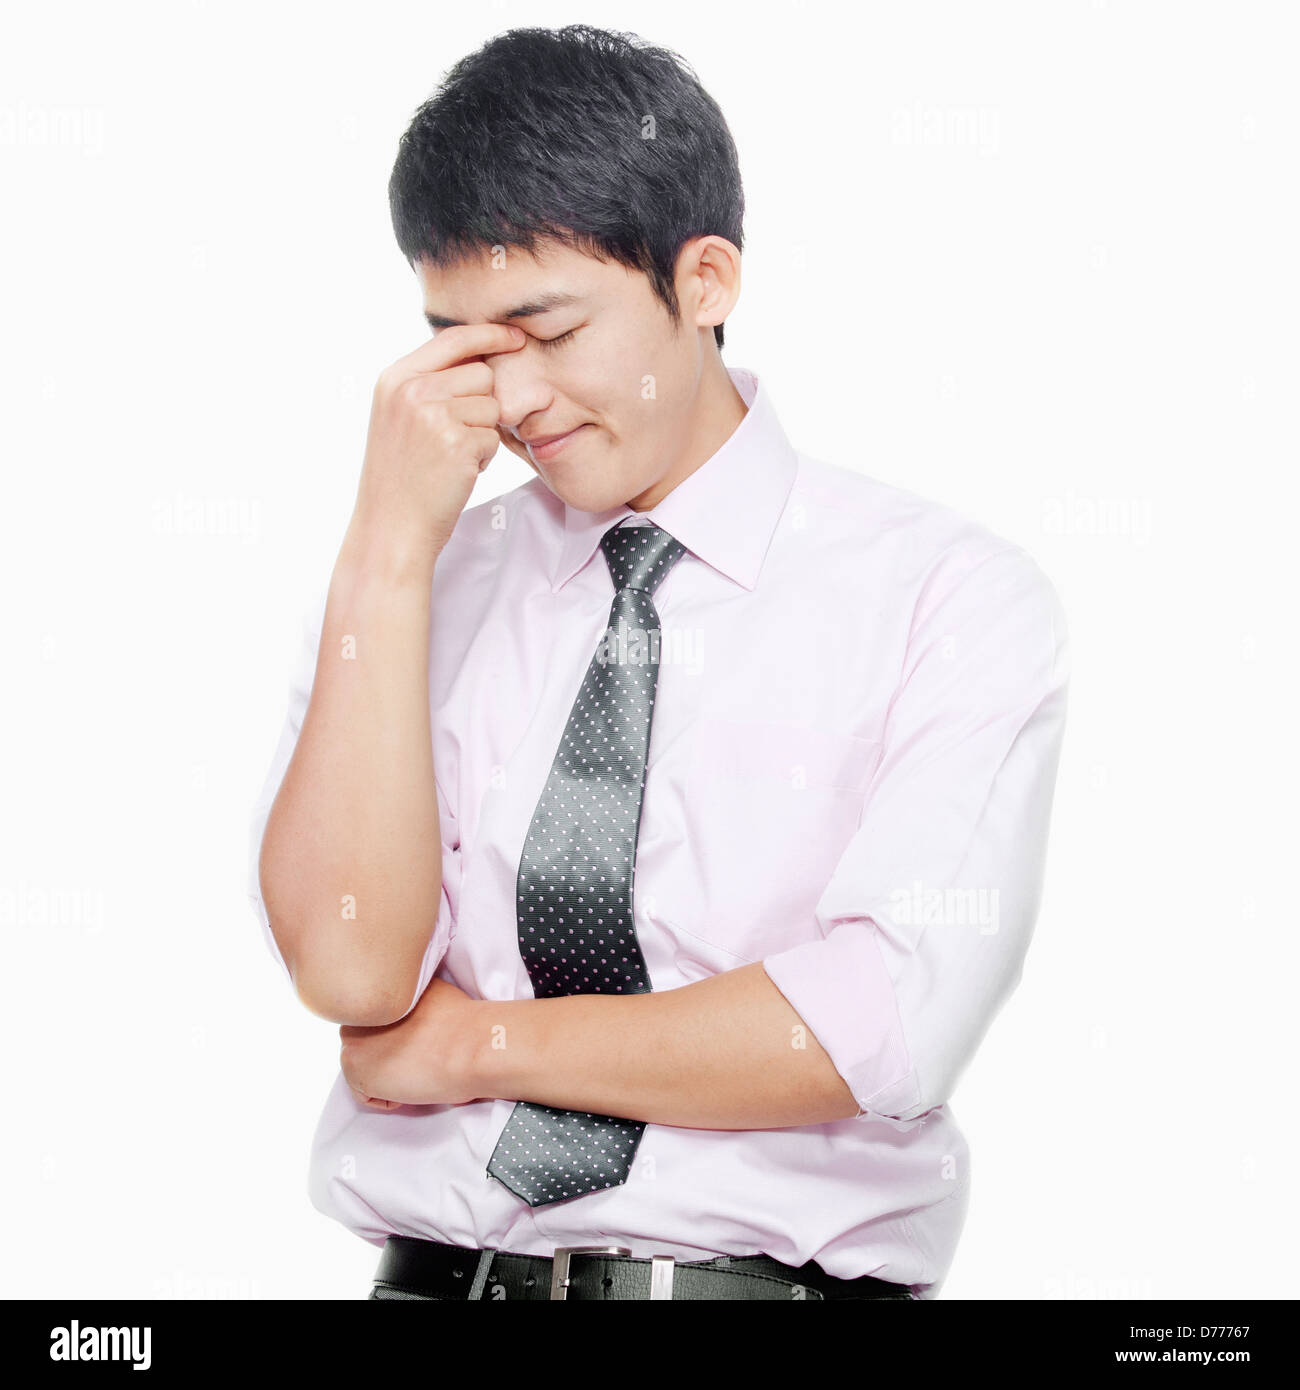 Young man with eyes closed thinking Stock Photo